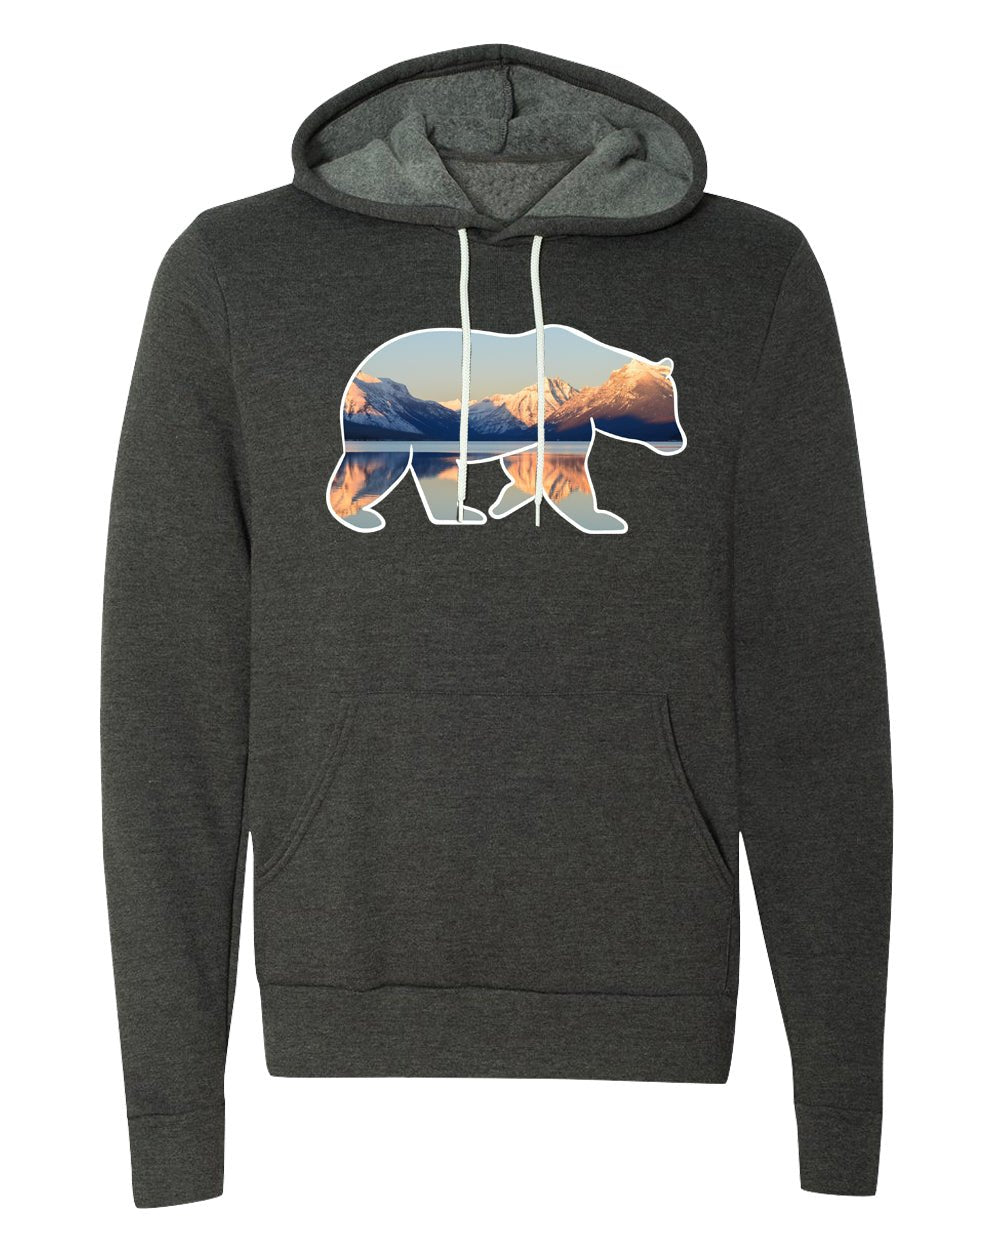 Sweater - Bear Hoodie With Mountains  Outdoor Hoodie Hiking Sweaters